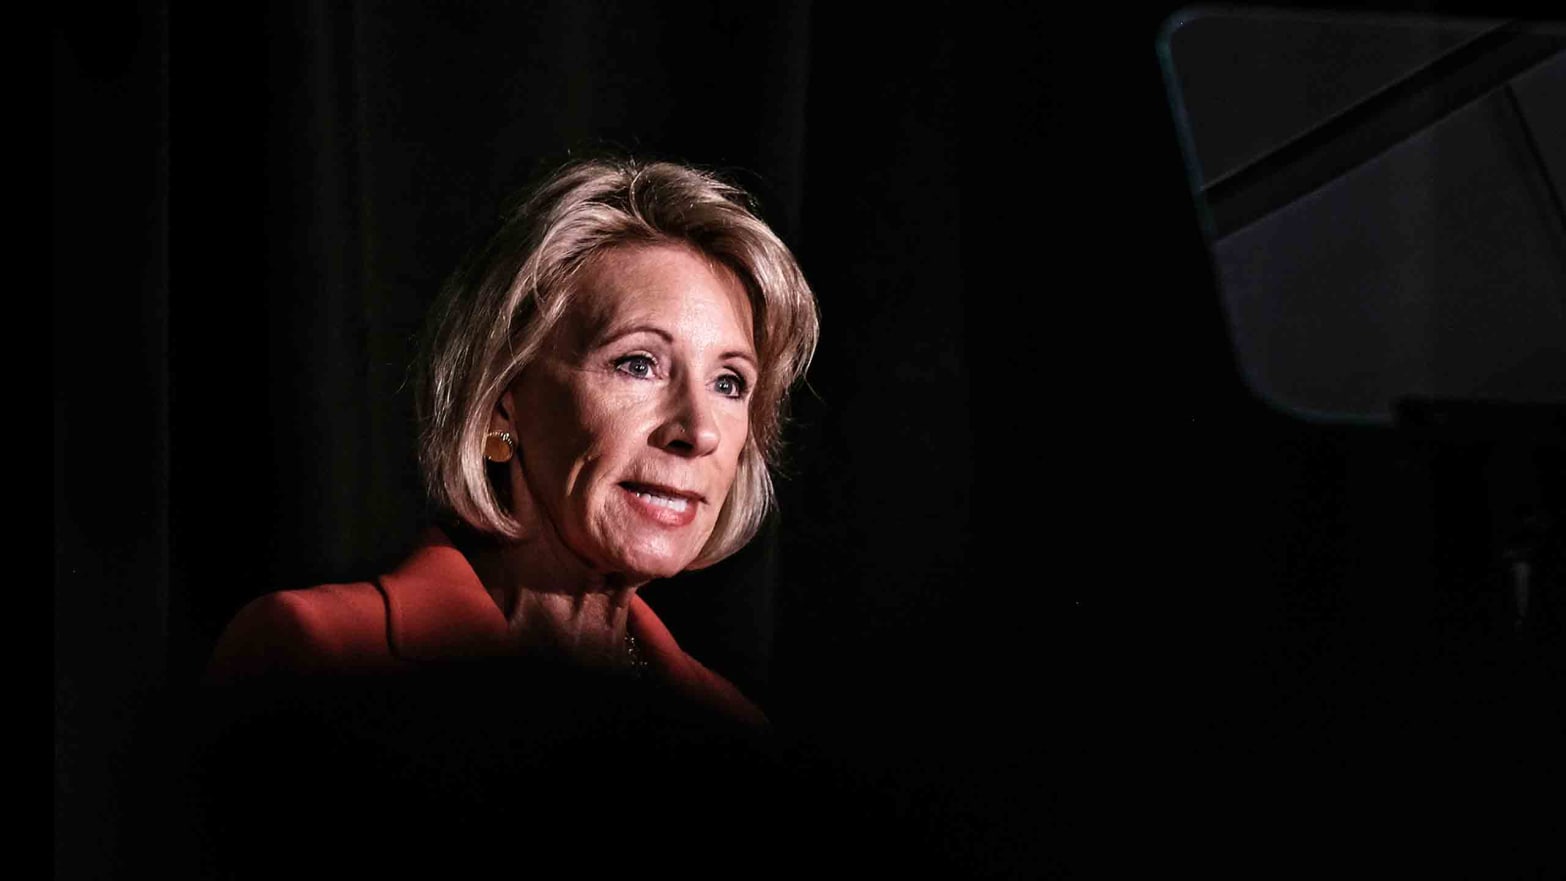 Betsy DeVos New Title IX Changes Leave Both Sides in Limbo